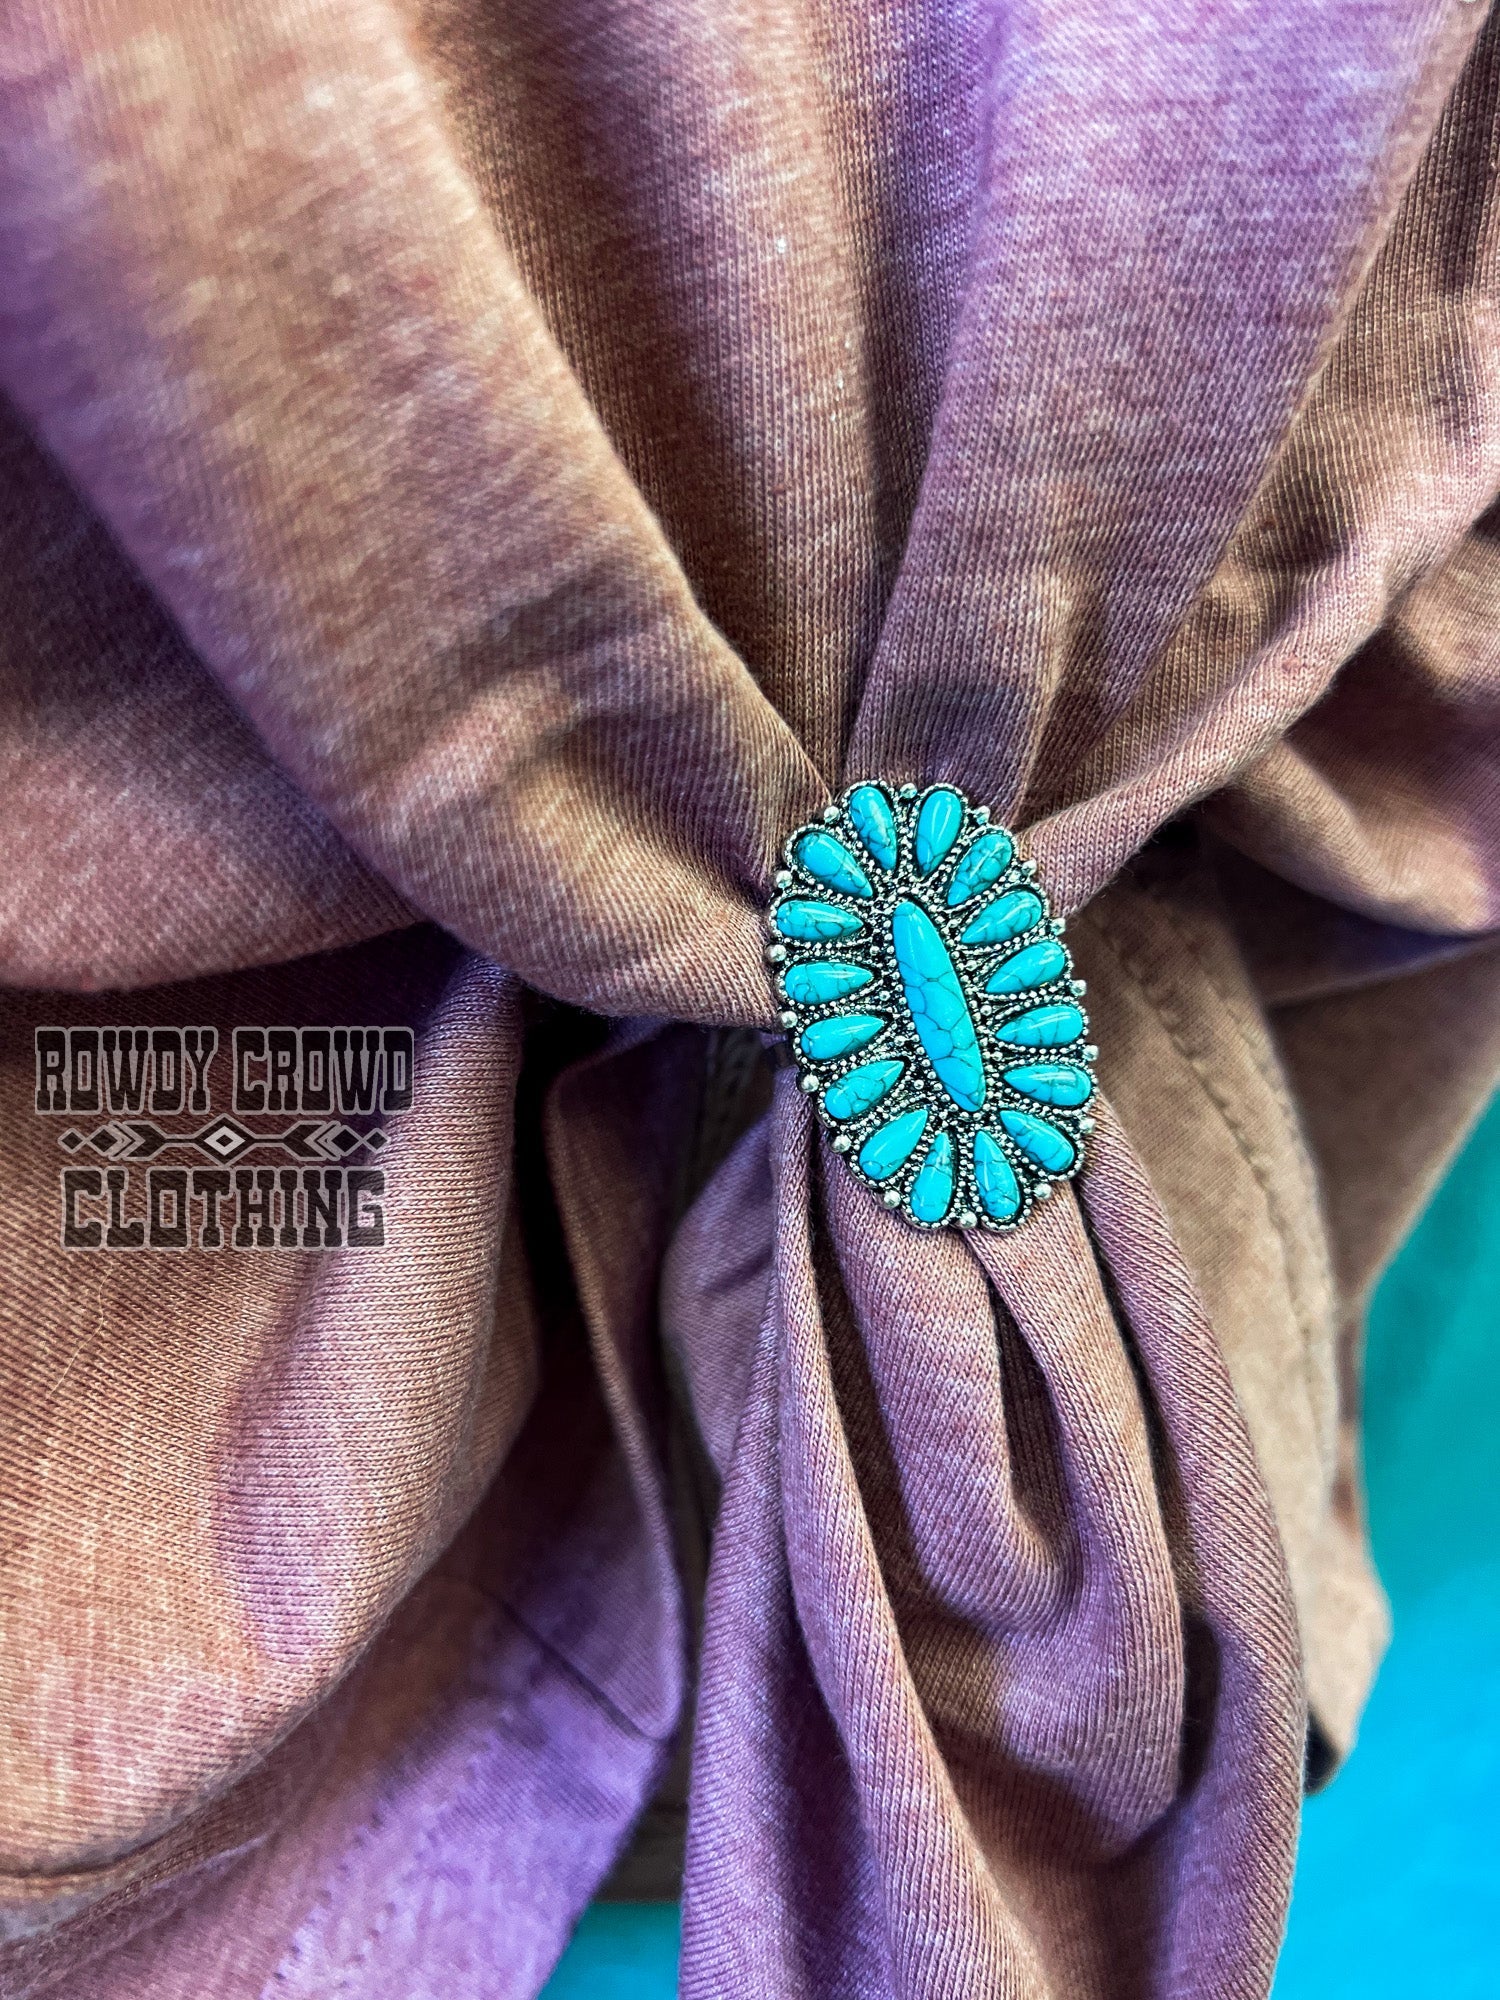 Western Accessories, Western Jewelry, Southwestern Jewelry, Western Jewelry Wholesale, Cowgirl Jewelry, Western Wholesale, Wholesale Accessories, Wholesale Jewelry, Wild rag scarf slide, cowboy scarf slides, turquoise scarf slides, western scarf slides, scarf rings and slides